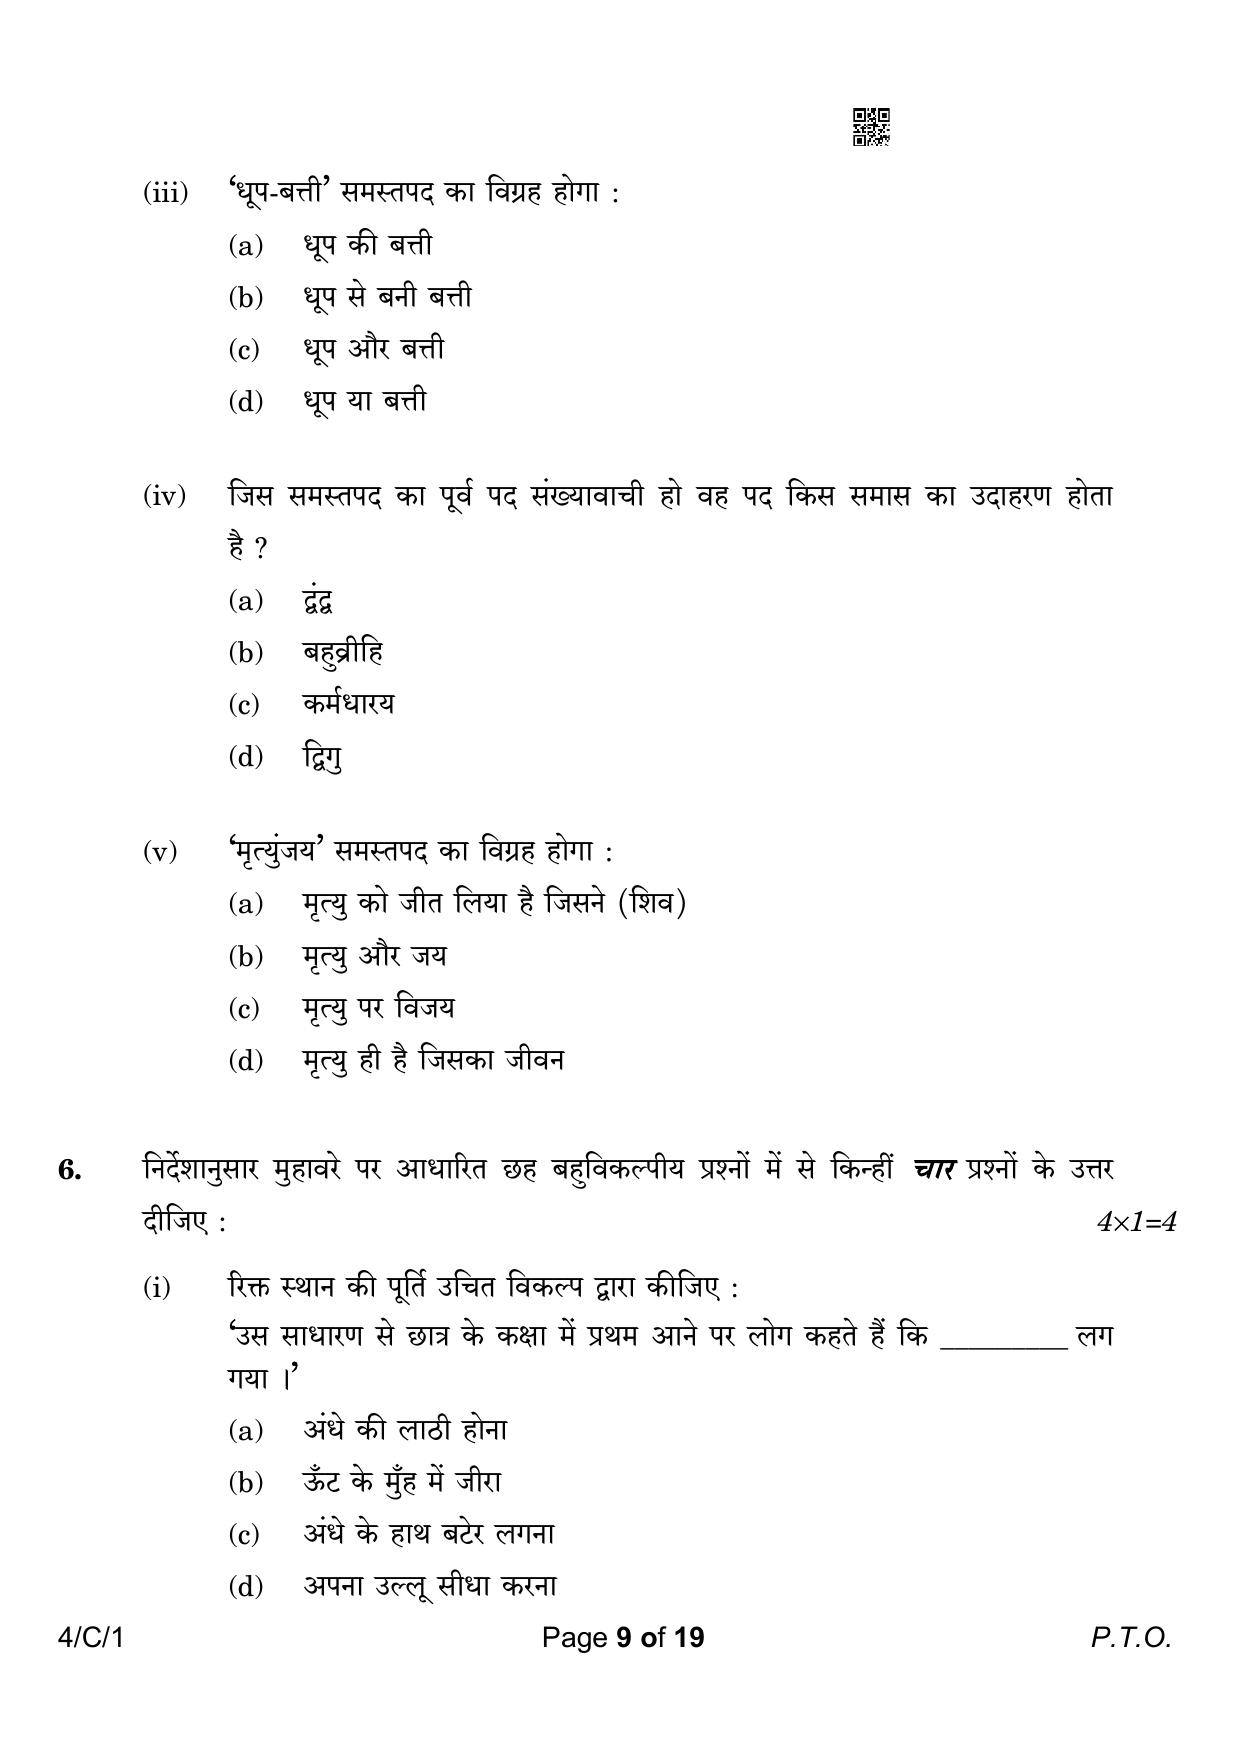 CBSE Class 10 4-1 Hindi B 2023 (Compartment) Question Paper - Page 9